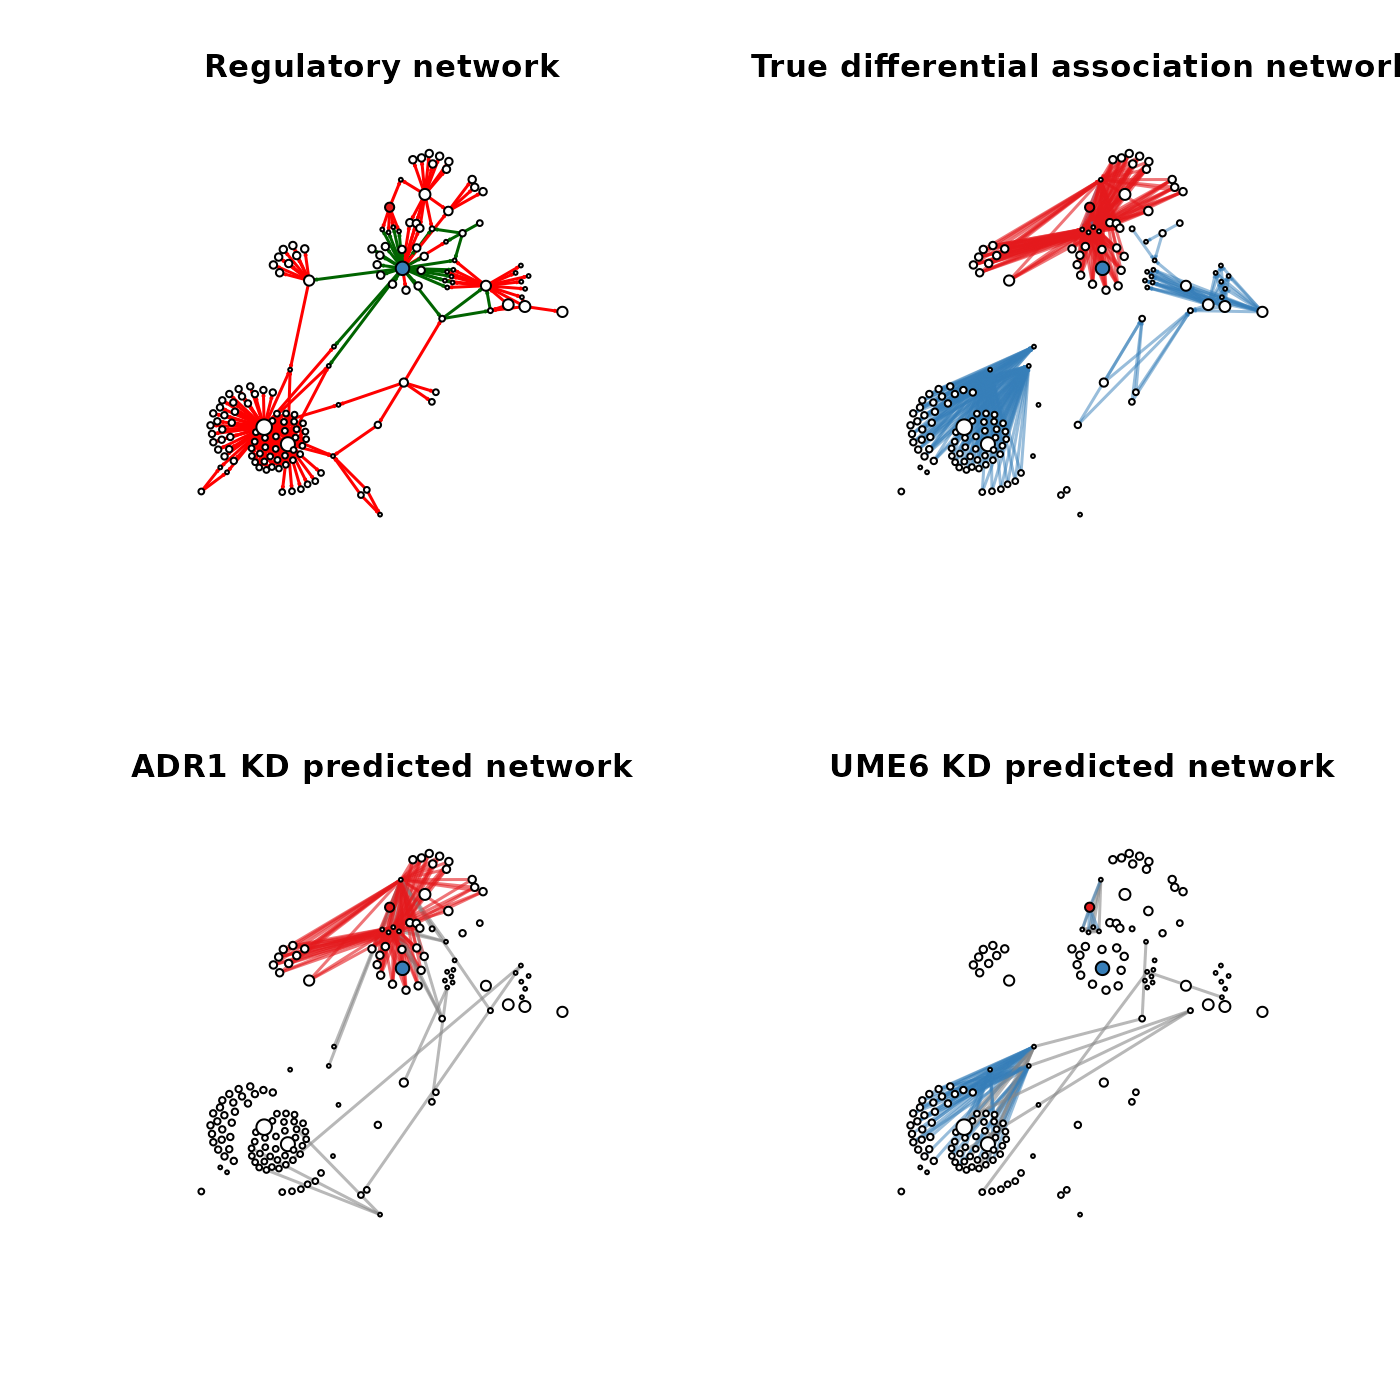 Differential network analysis on simulations. Top-left to bottom-right: The original regulatory network used for simulations; the true induced differential network that results from both ADR1 and UME6 knock-downs (KDs); the predicted ADR1 knock-down differential network, and; the predicted UME6 knock-down differential network. Reg and green edges in the regulatory network represent activation and repression respectively. Edges in the differential network are coloured based on the knock-down that results in their differential co-expression. True positives in the predicted network are coloured based on their knock-down while false positives are coloured grey